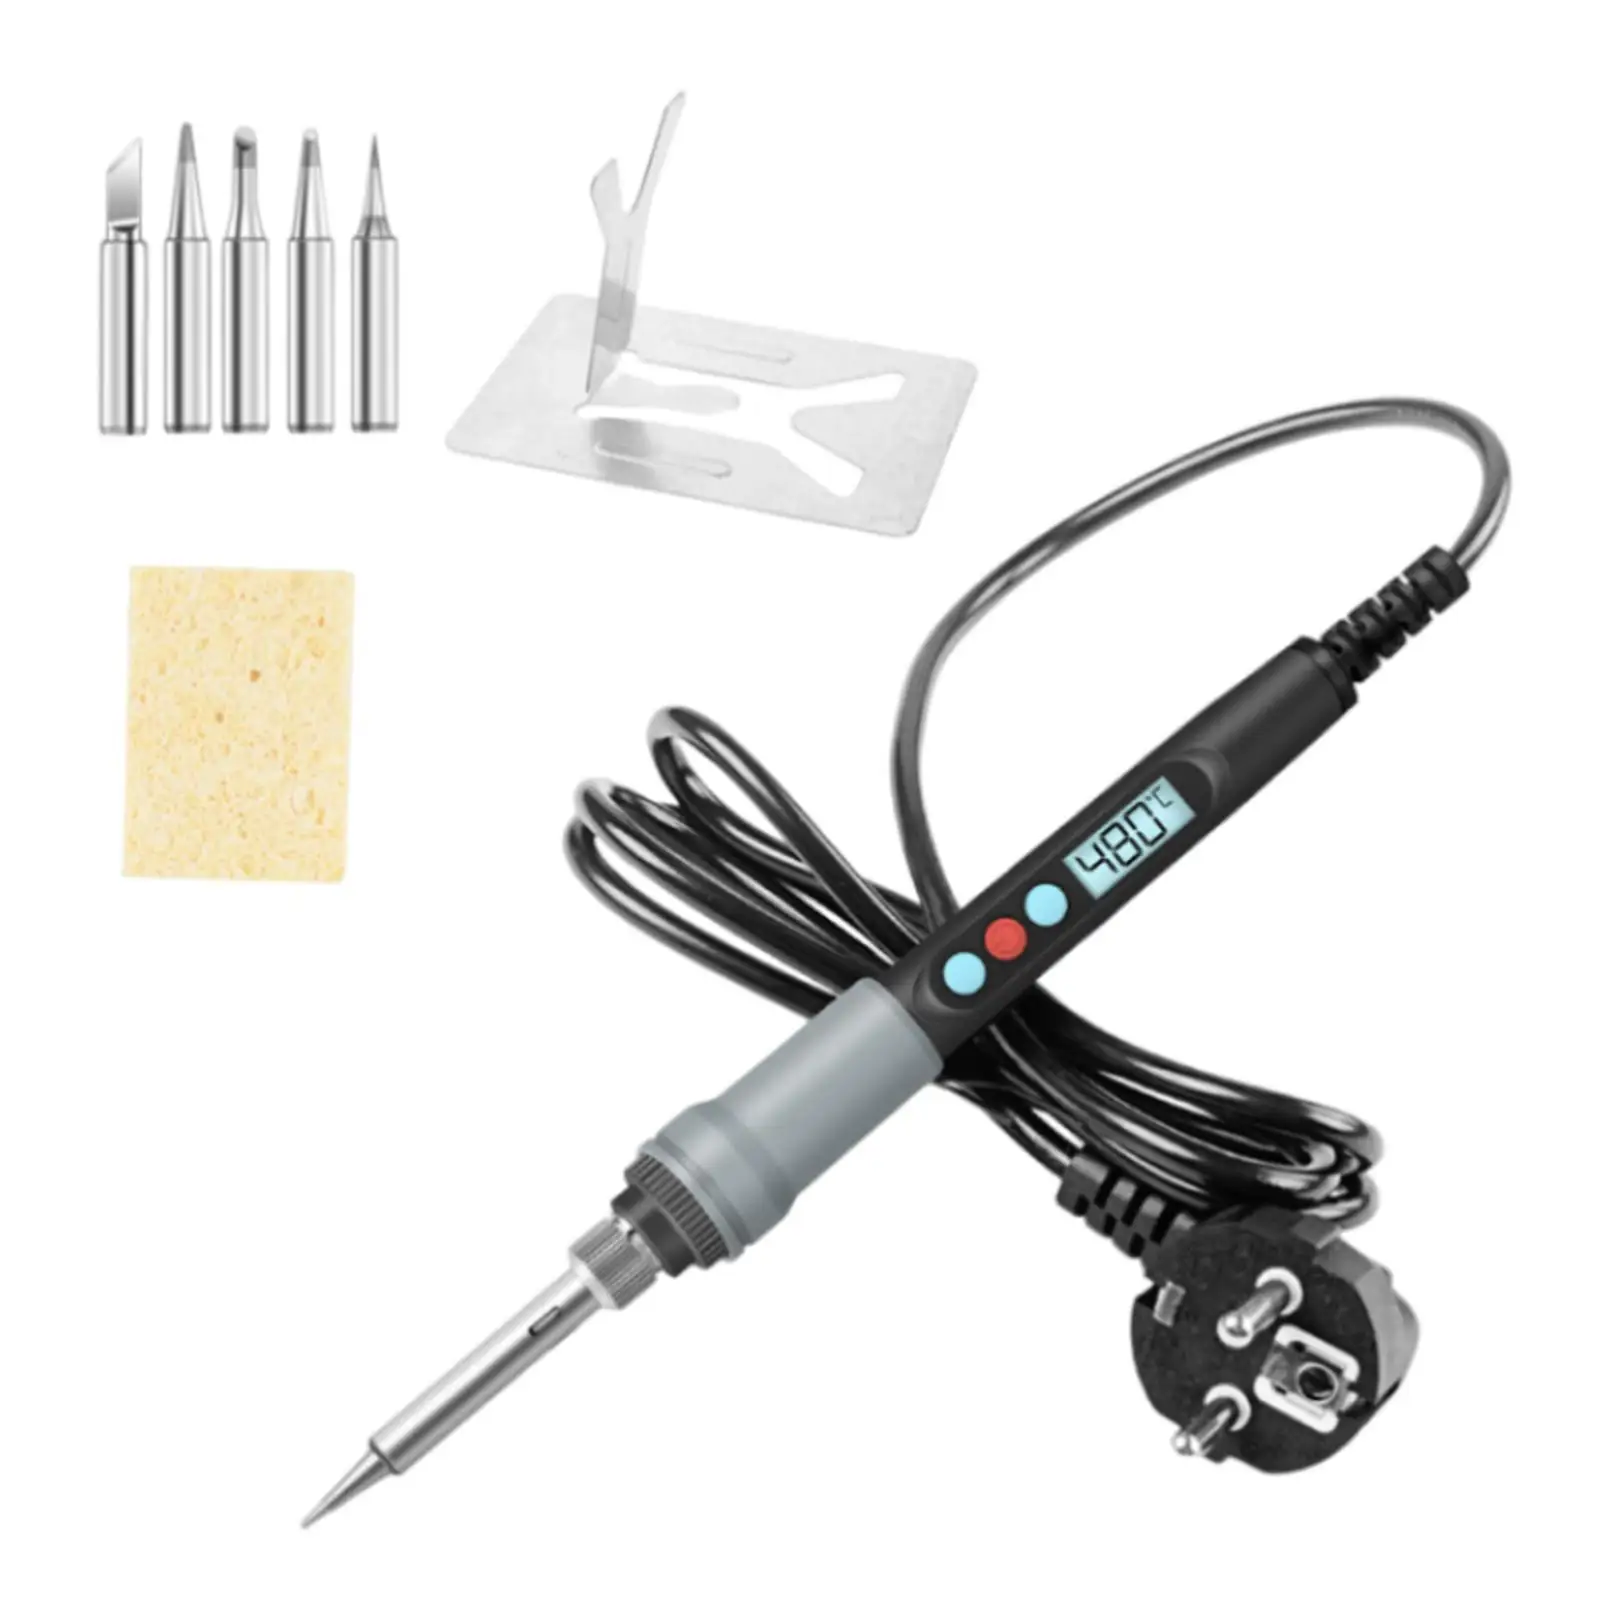 Electric Soldering Station Welding Iron Kits Welding Repair Tool Adjustable Temperature Solder Station for Hobby Home Appliance